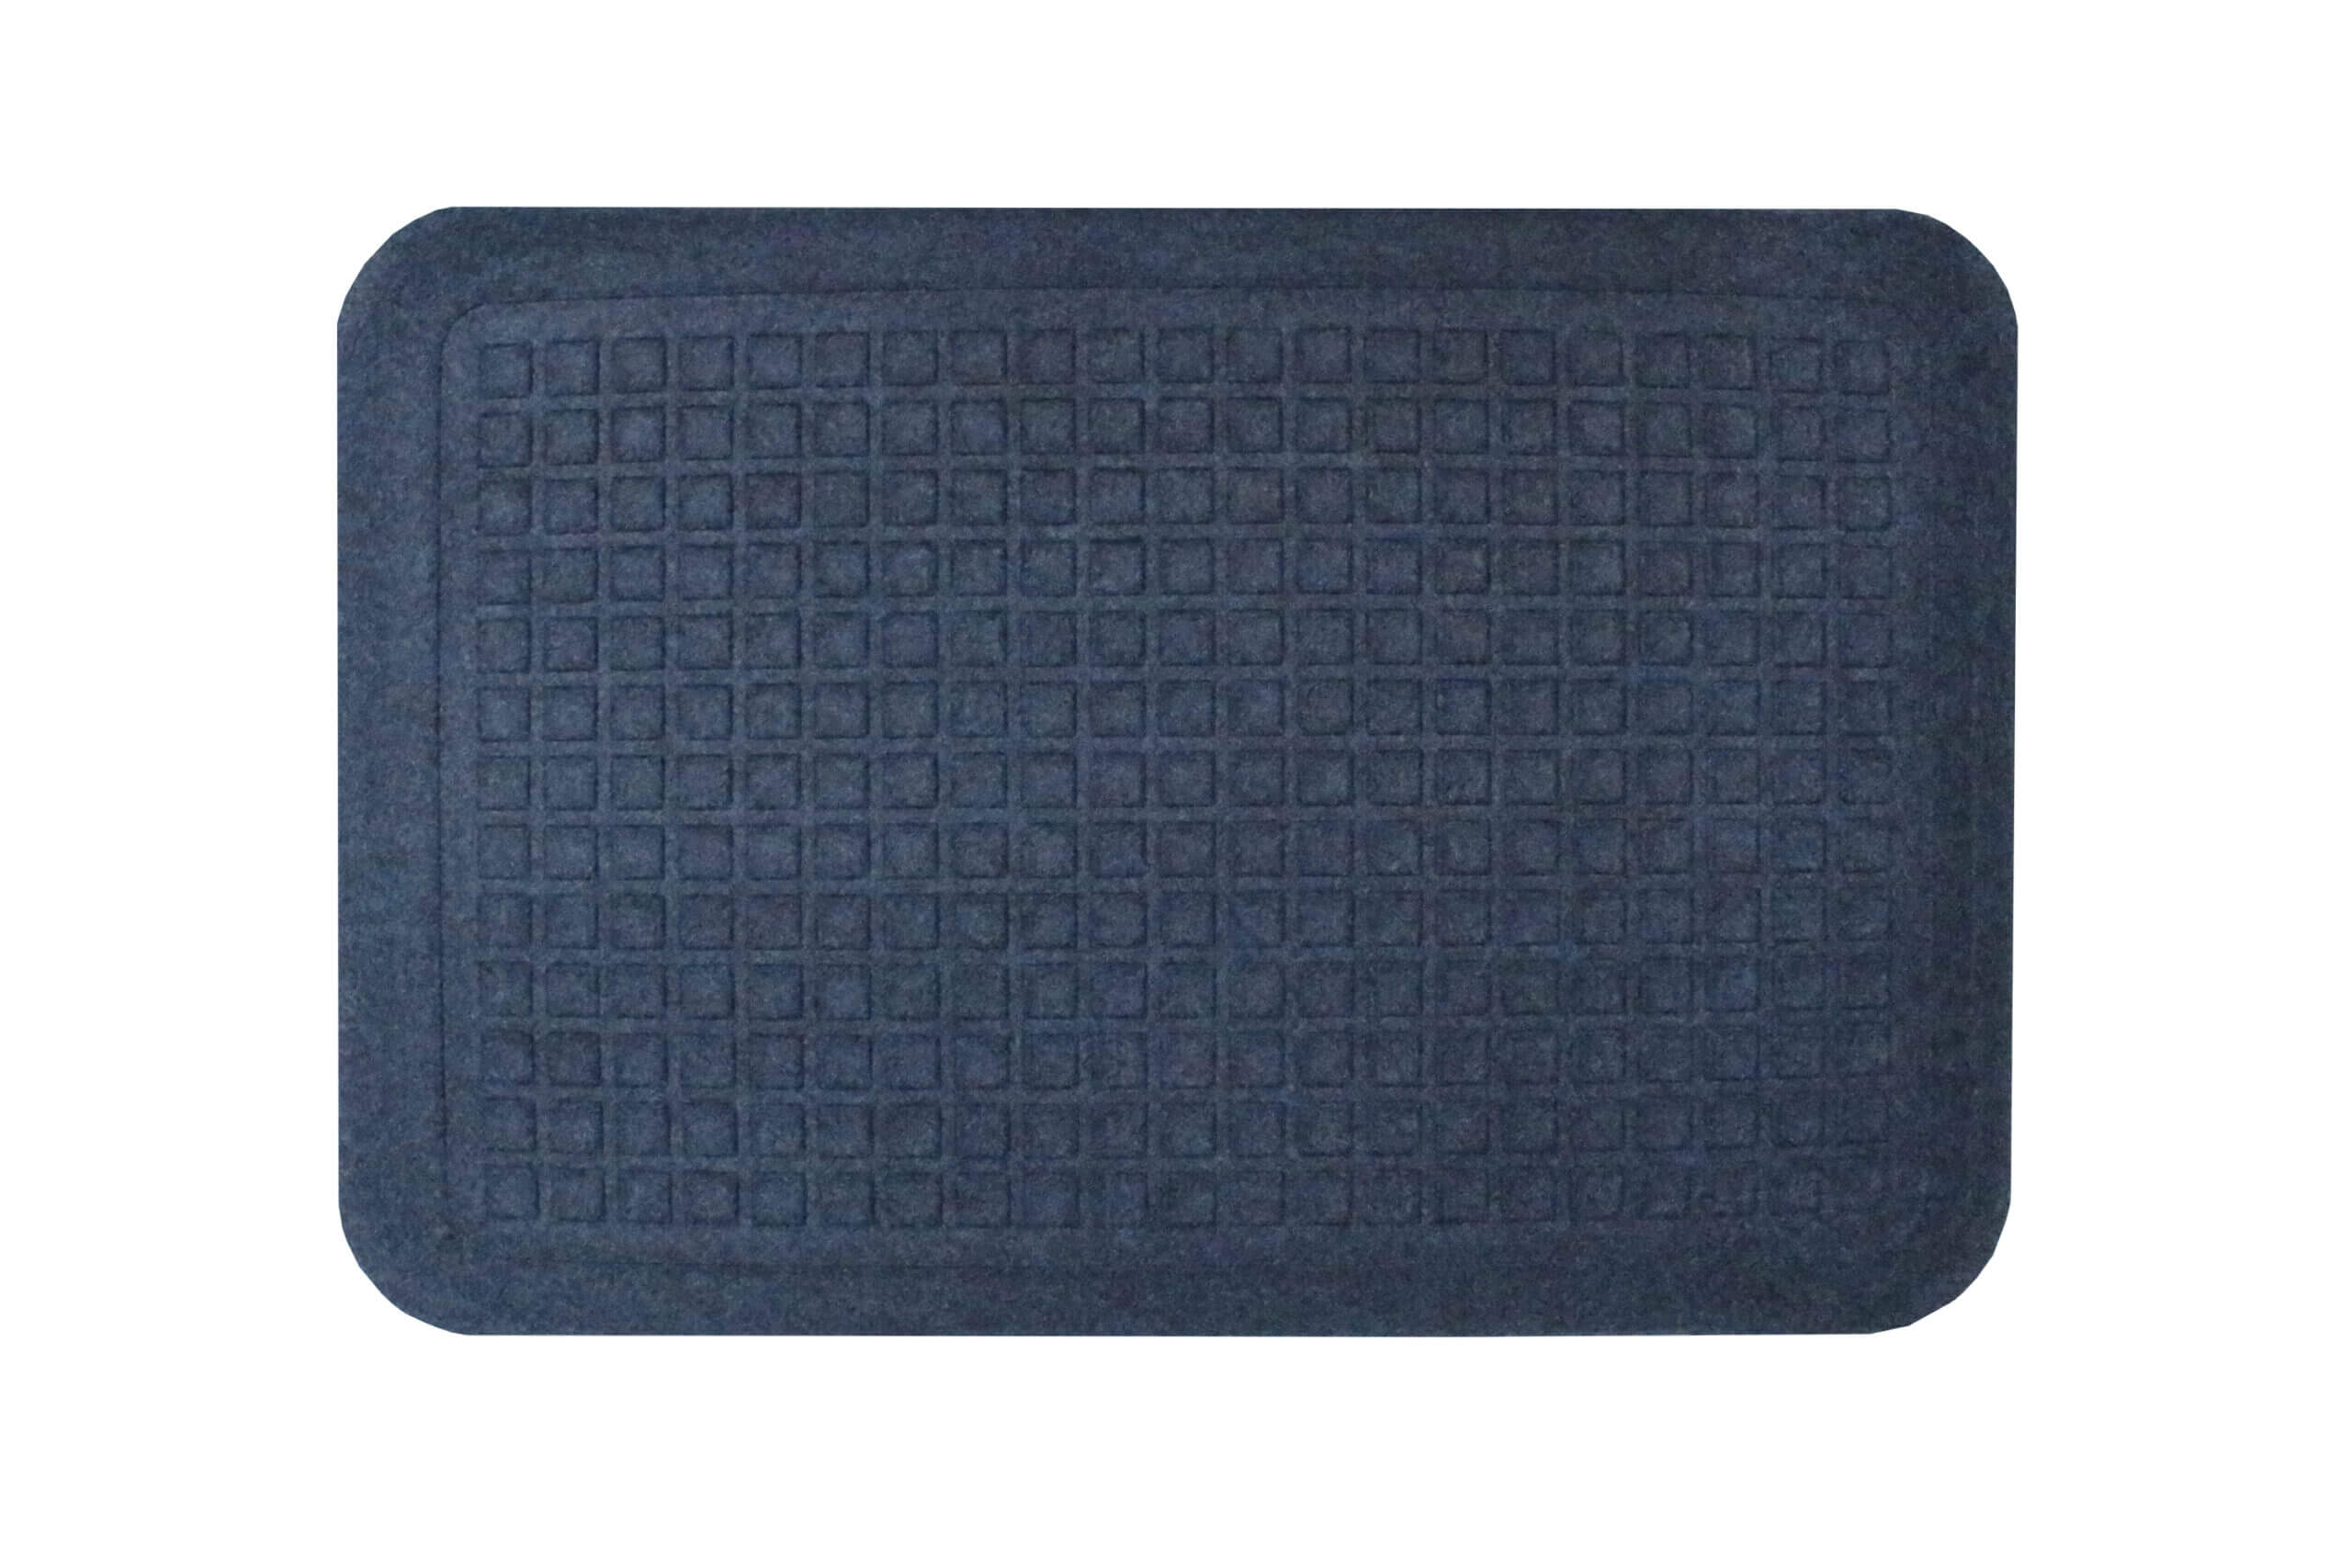 isolated image of an anti-fatigue mat in colbalt blue